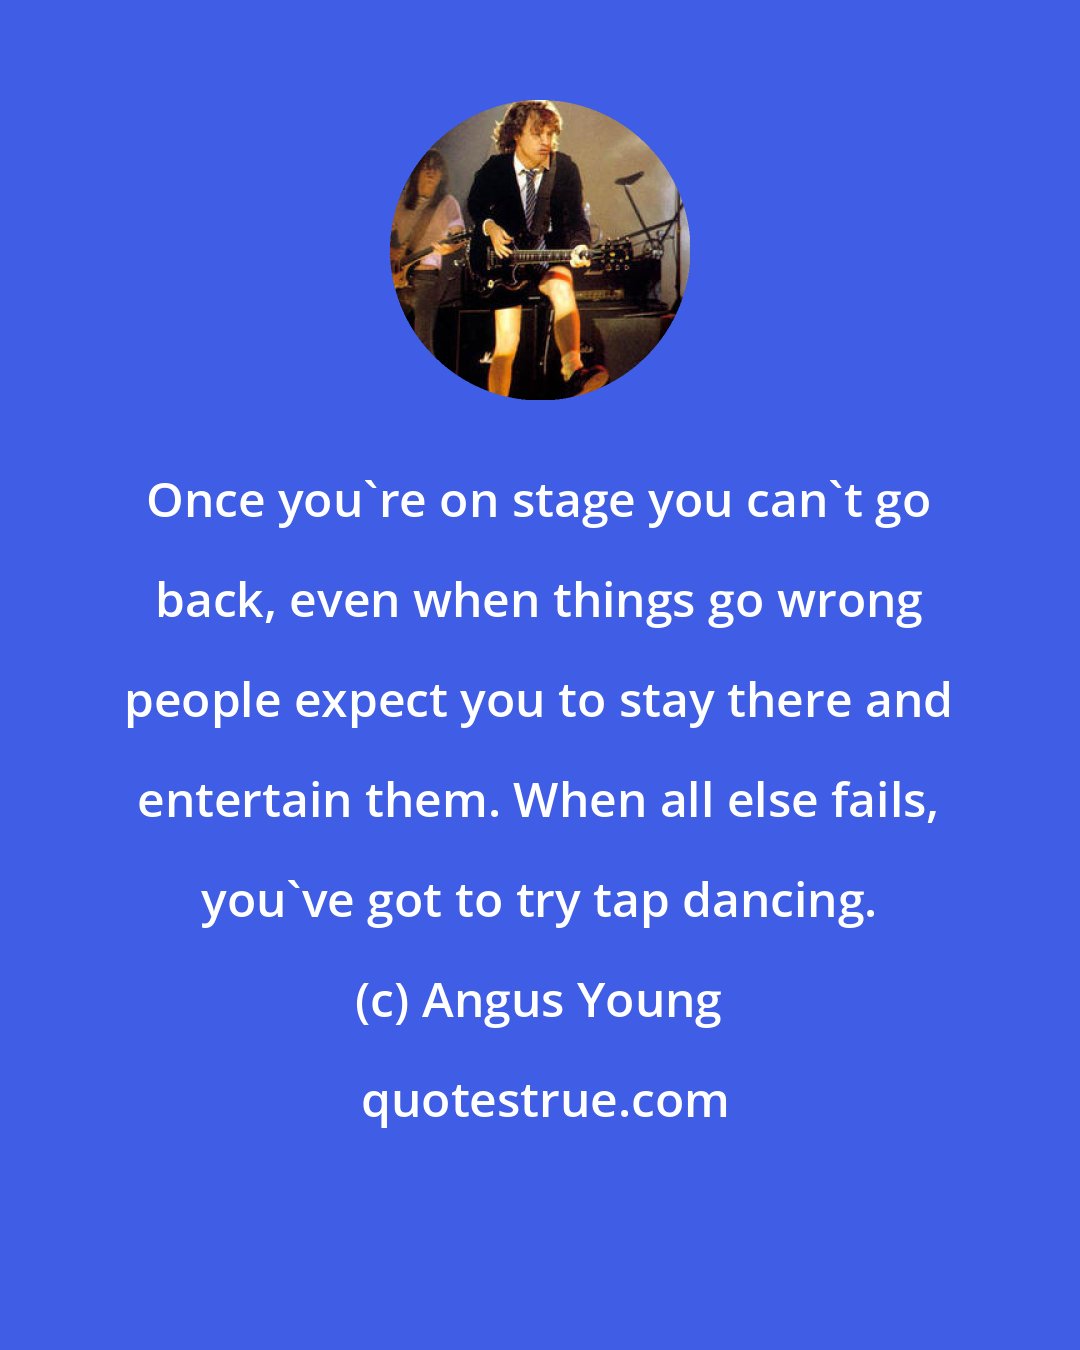 Angus Young: Once you're on stage you can't go back, even when things go wrong people expect you to stay there and entertain them. When all else fails, you've got to try tap dancing.